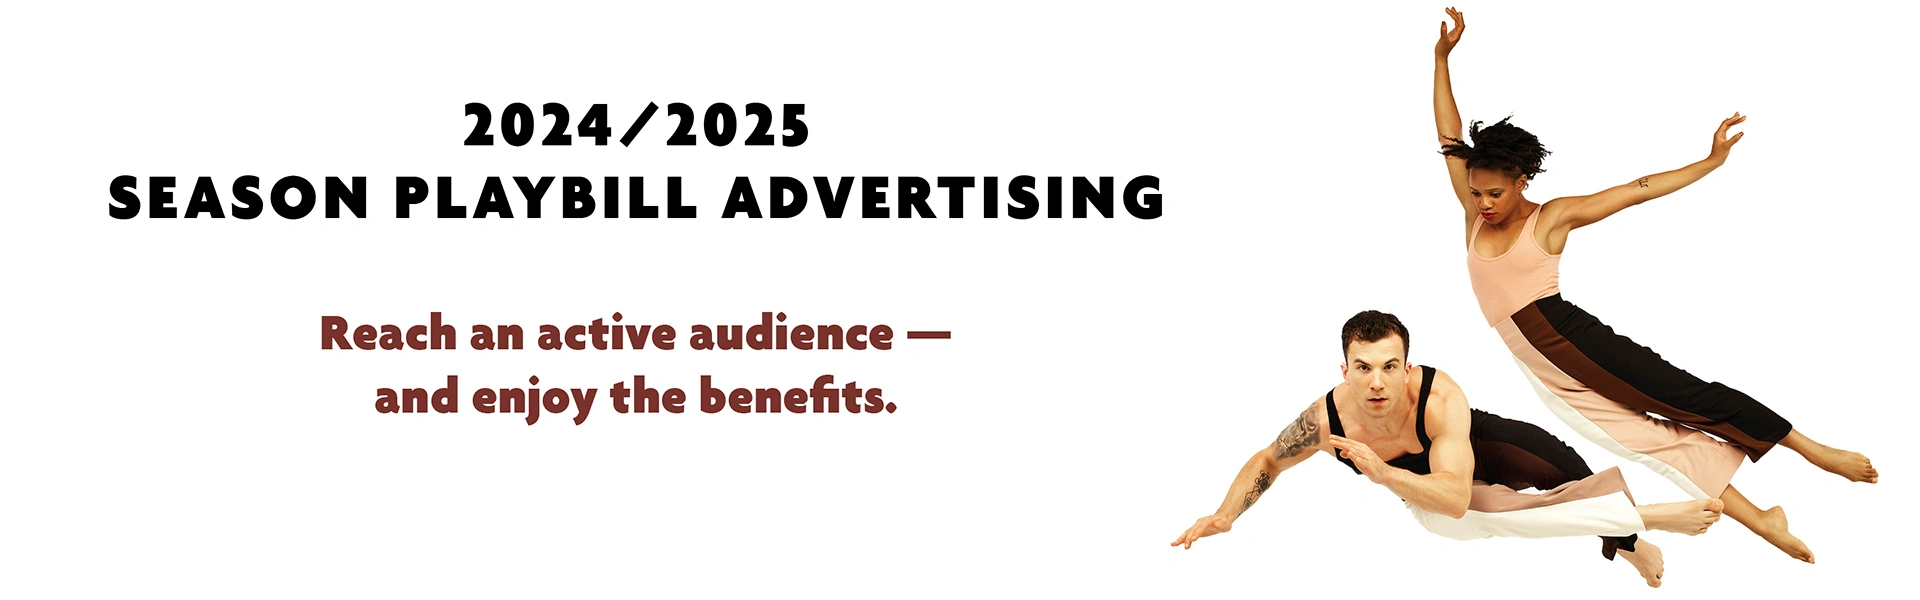 2024-2025 Season Playbill Advertising. Reach an active audience — and enjoy the benefits.